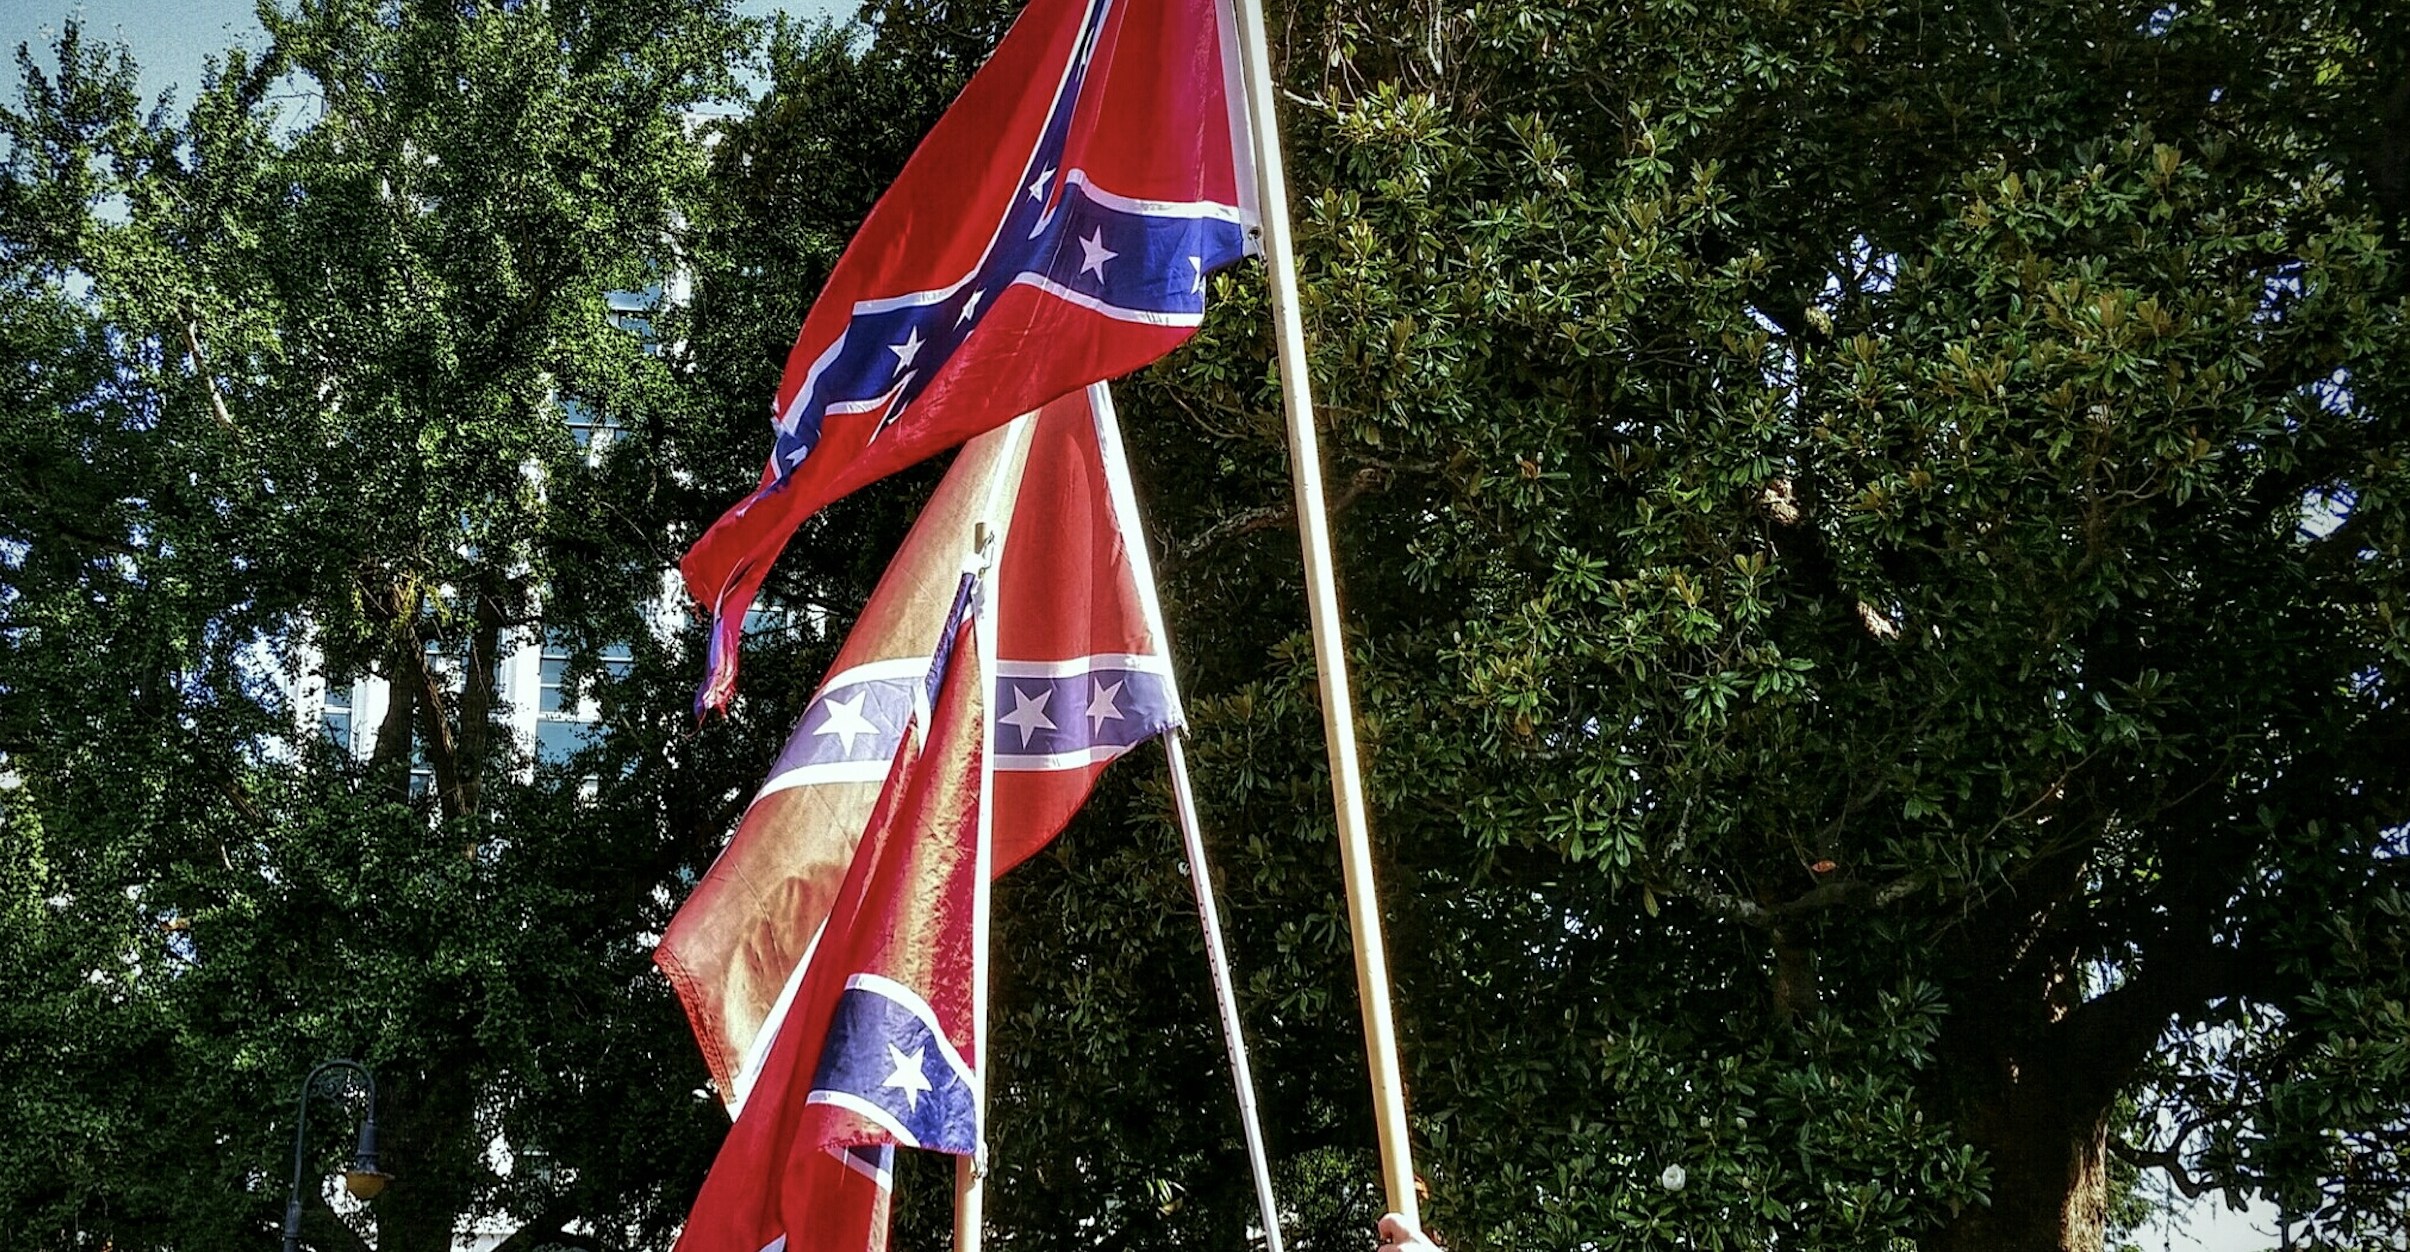 Black Students Suspended For Organizing A Protest After White Students Waved A Confederate Flag At School